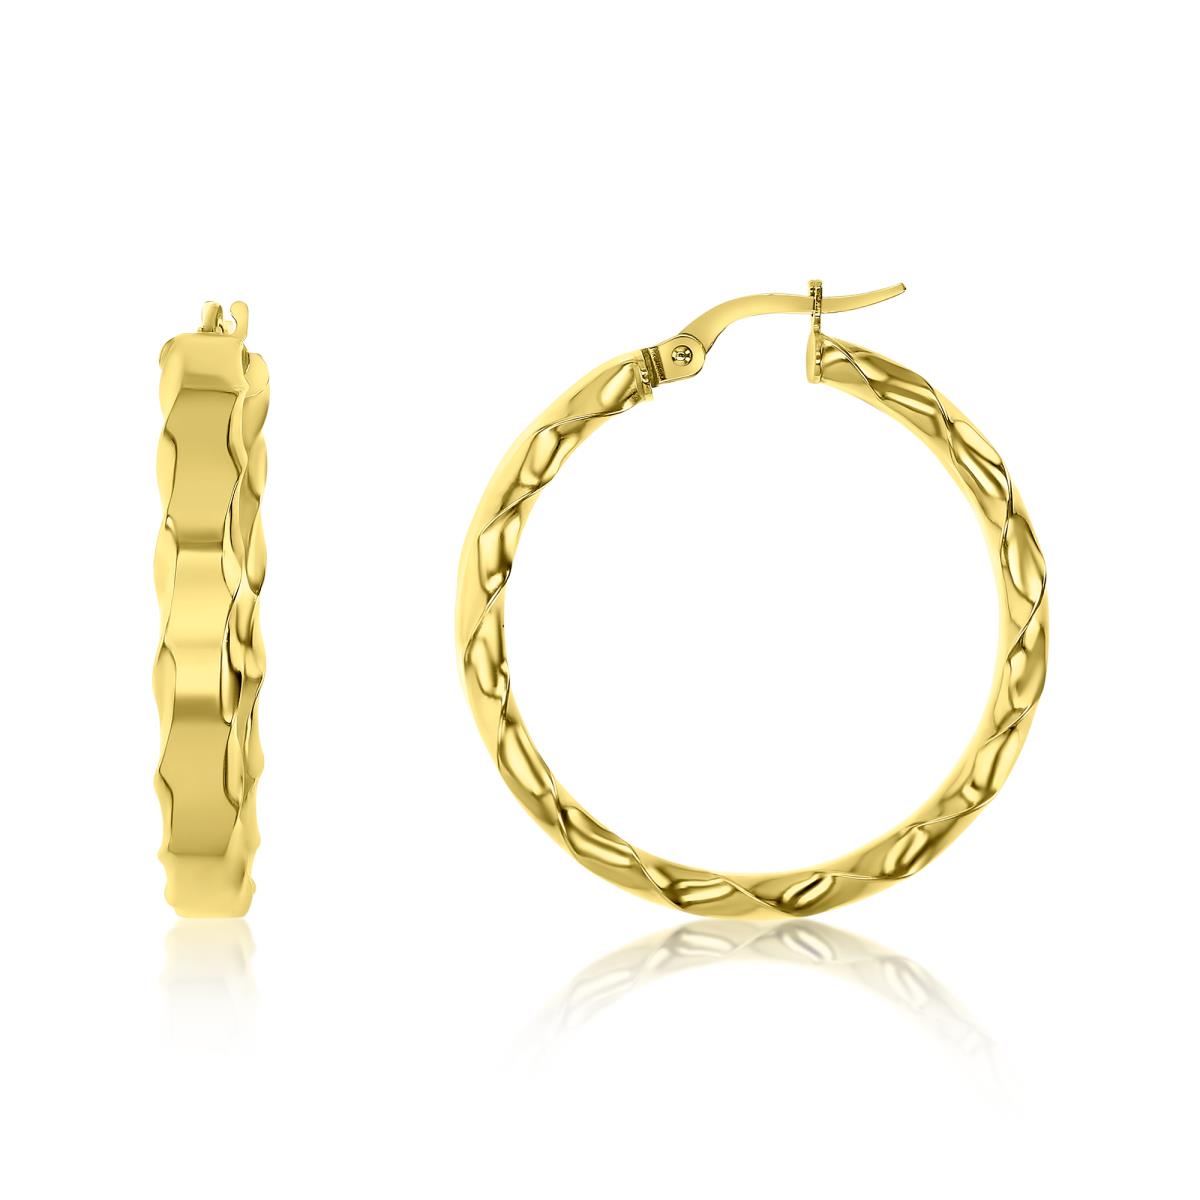 10K Gold Yellow Satin & Polished Twisted Hoop Earring